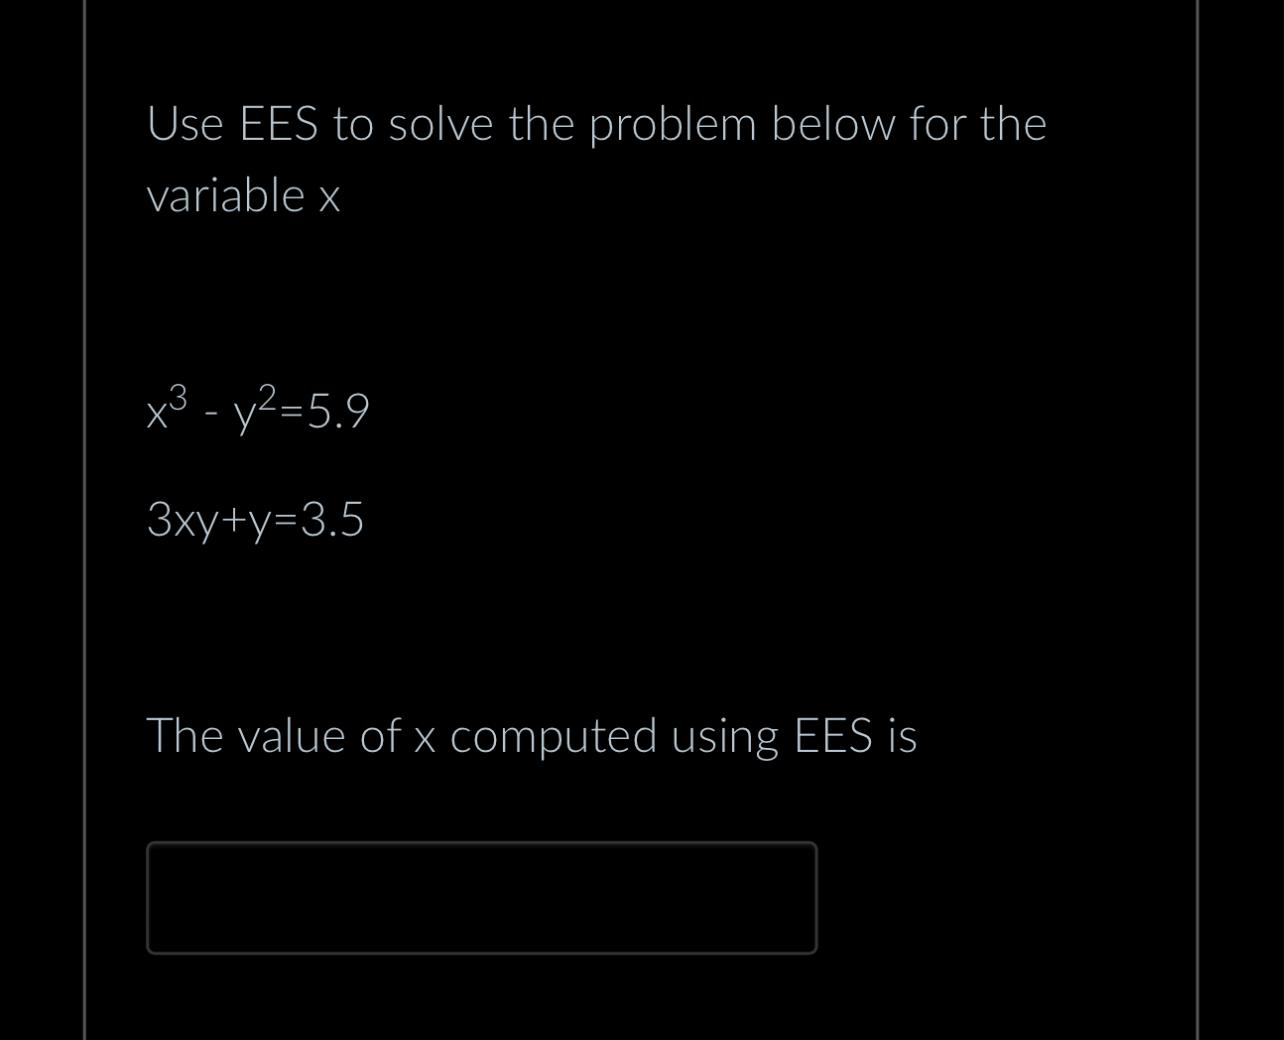 Use EES to solve the problem below for the variable x x-y=5.9 3xy+y=3.5 The value of x computed using EES is